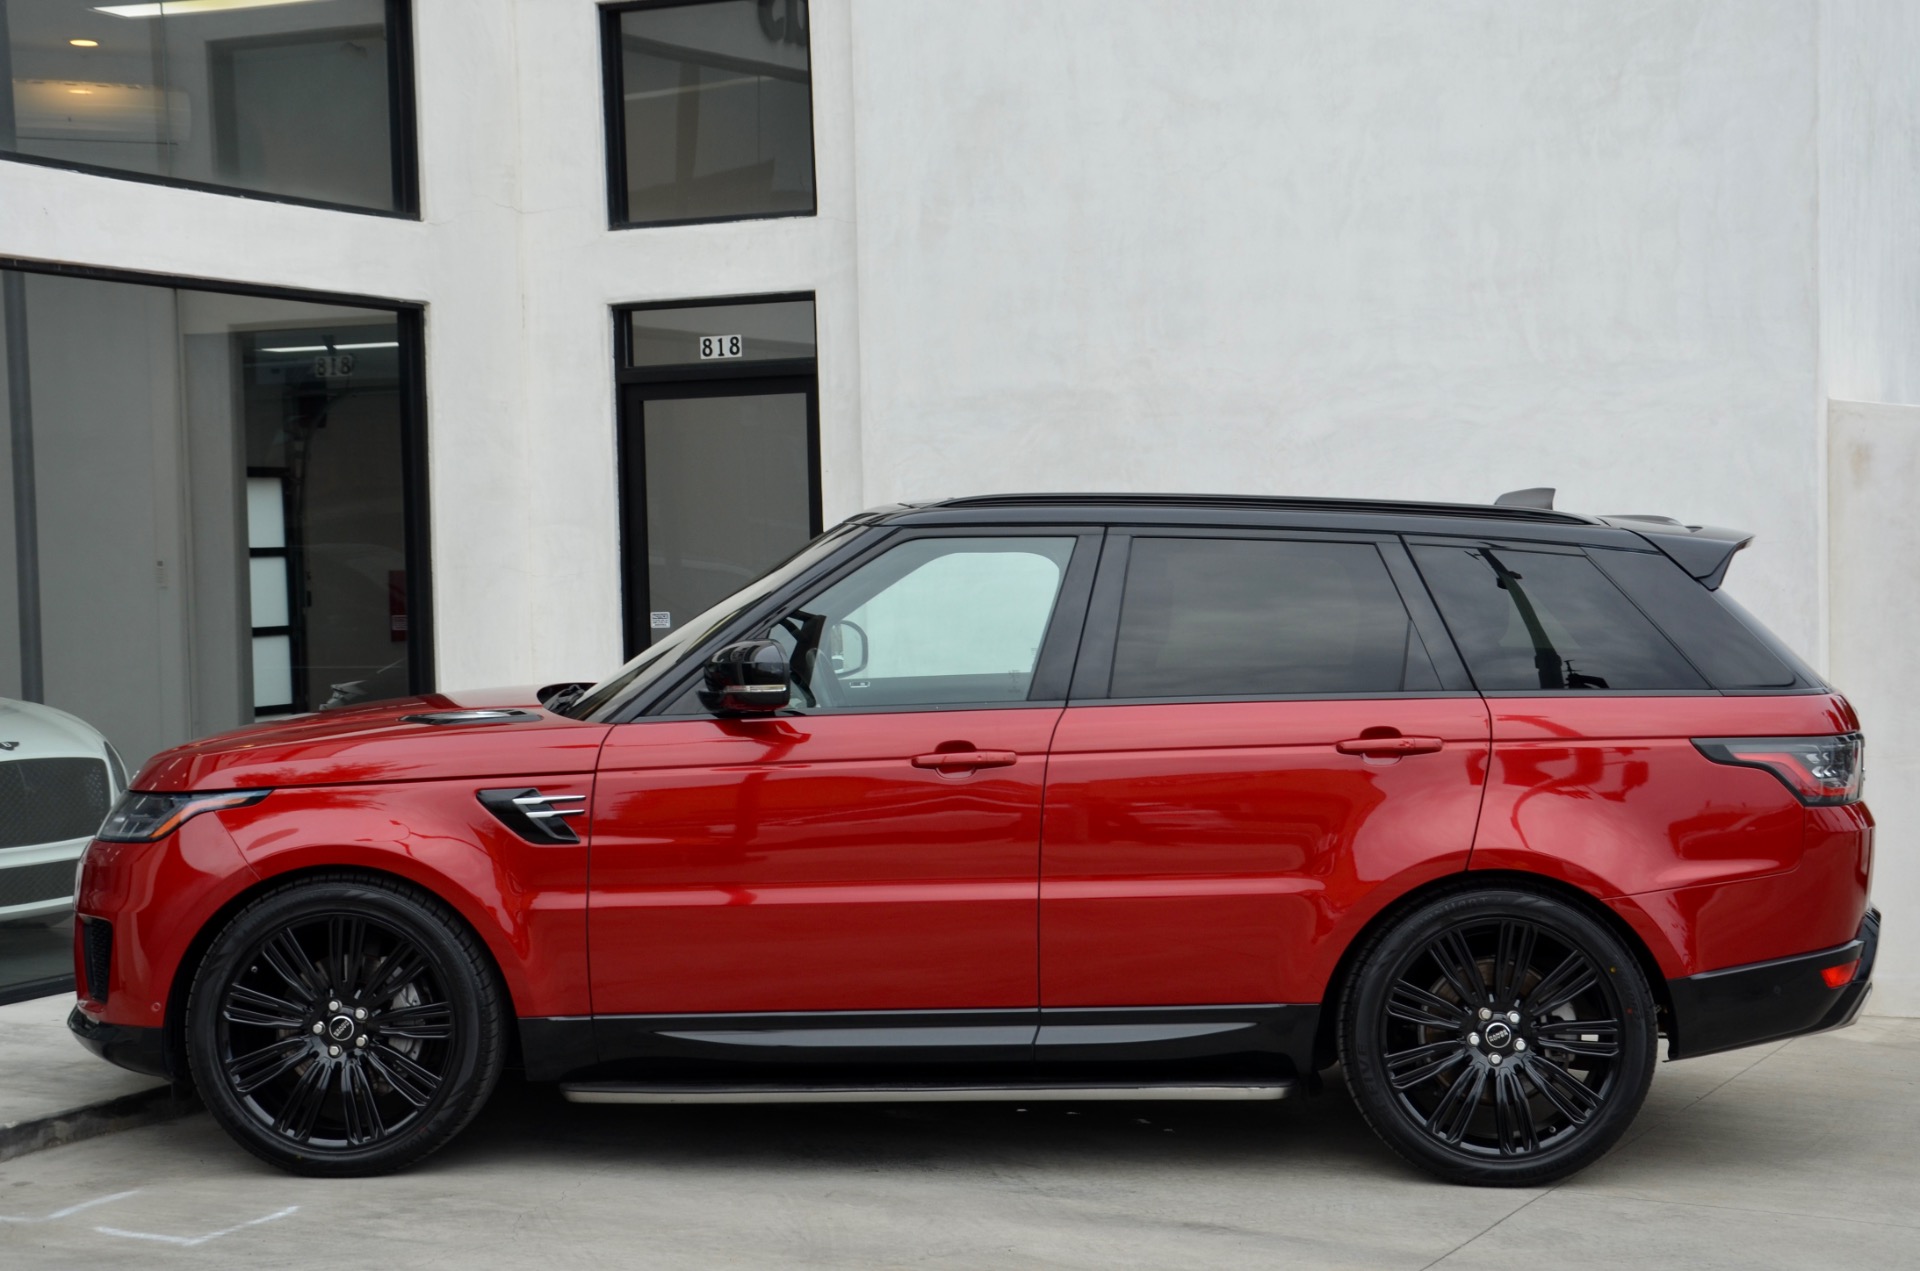 Used-2018-Land-Rover-Range-Rover-Sport-HSE